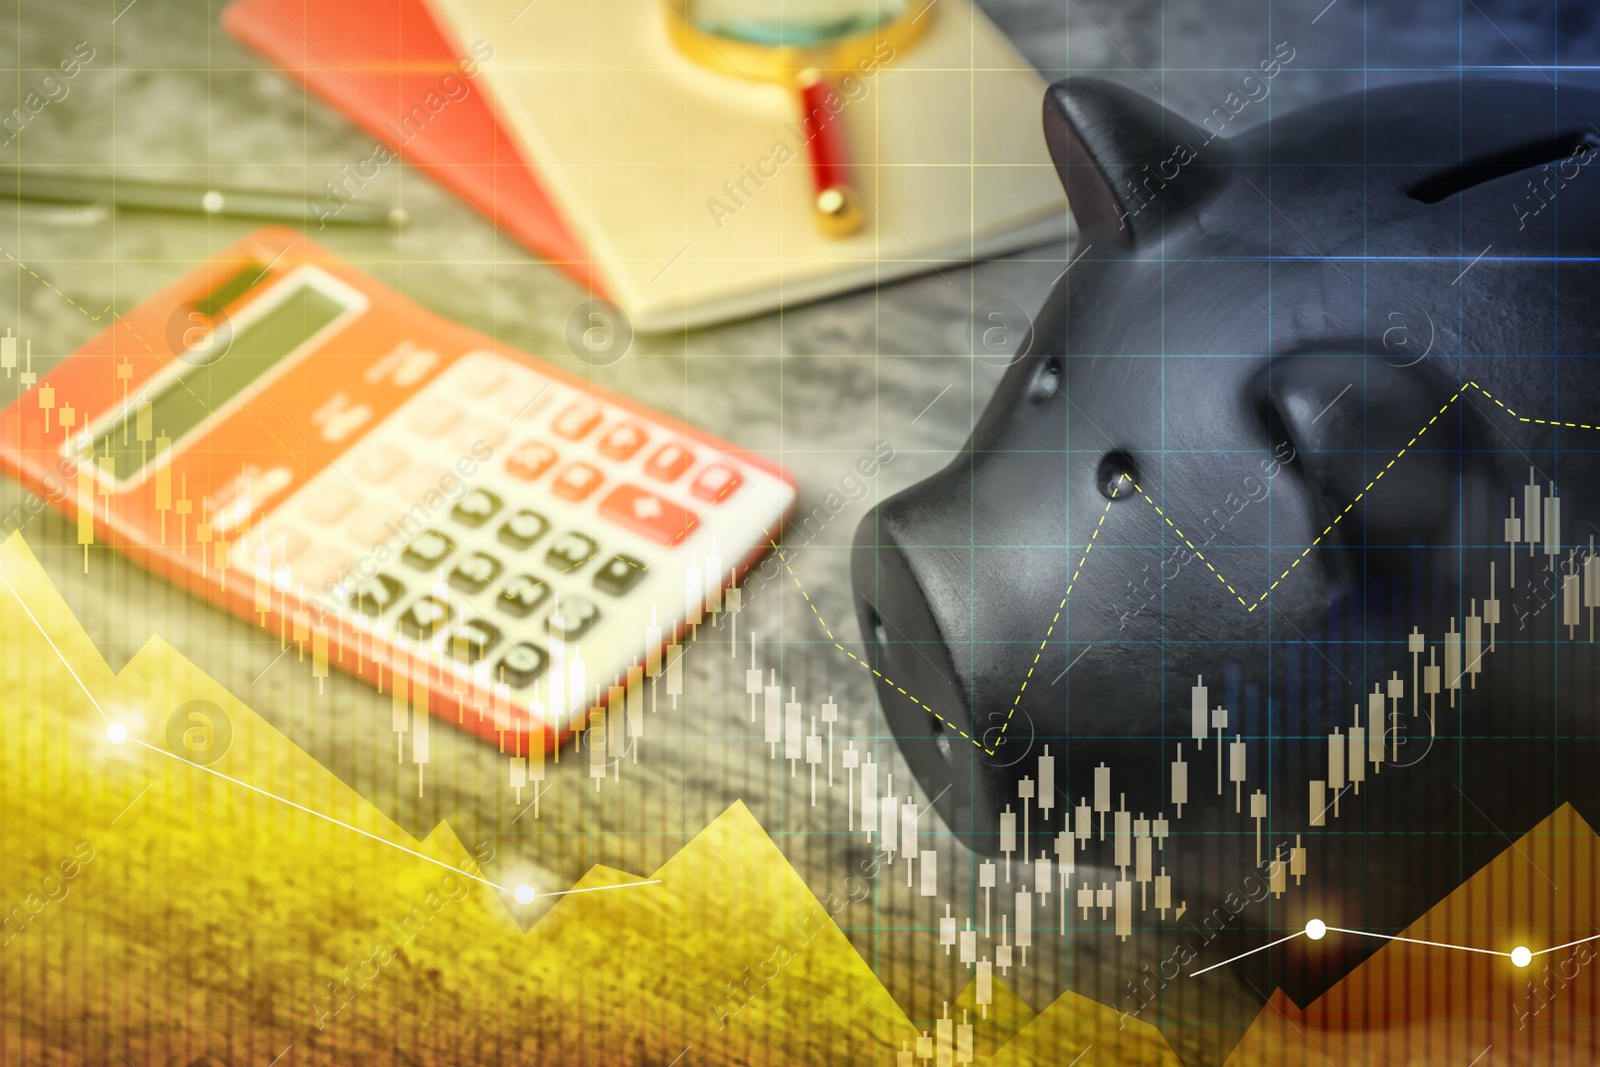 Image of Black piggy bank and calculator on table. Illustration of financial graphs